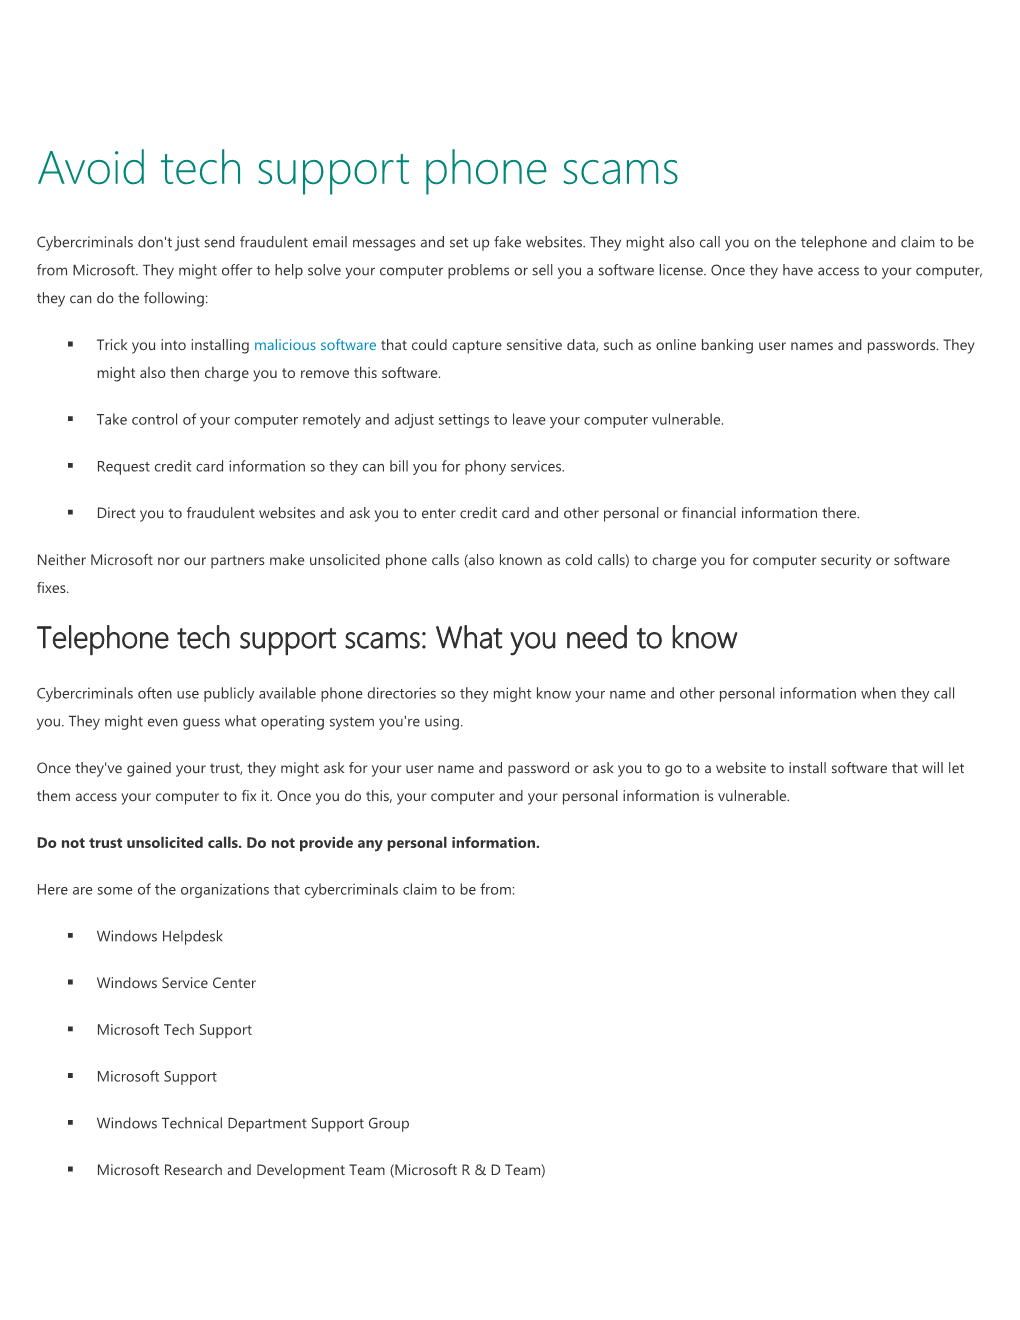 Avoid Tech Support Phone Scams